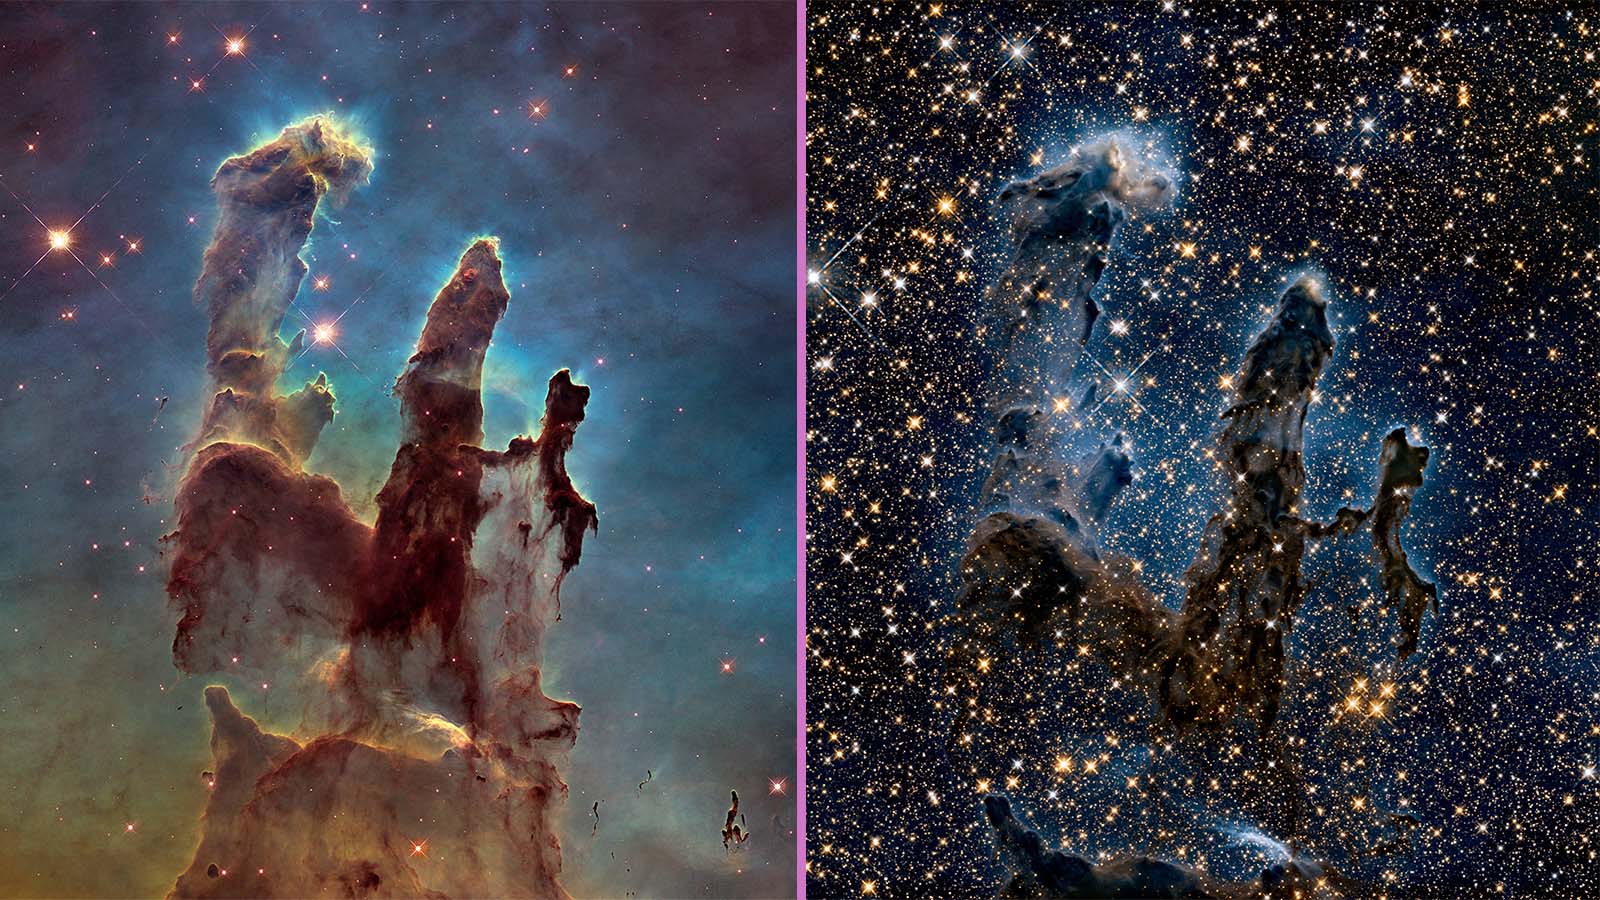 The Pillars of Creation in the Eagle nebula, as seen in visible light and near-infrared, side by side